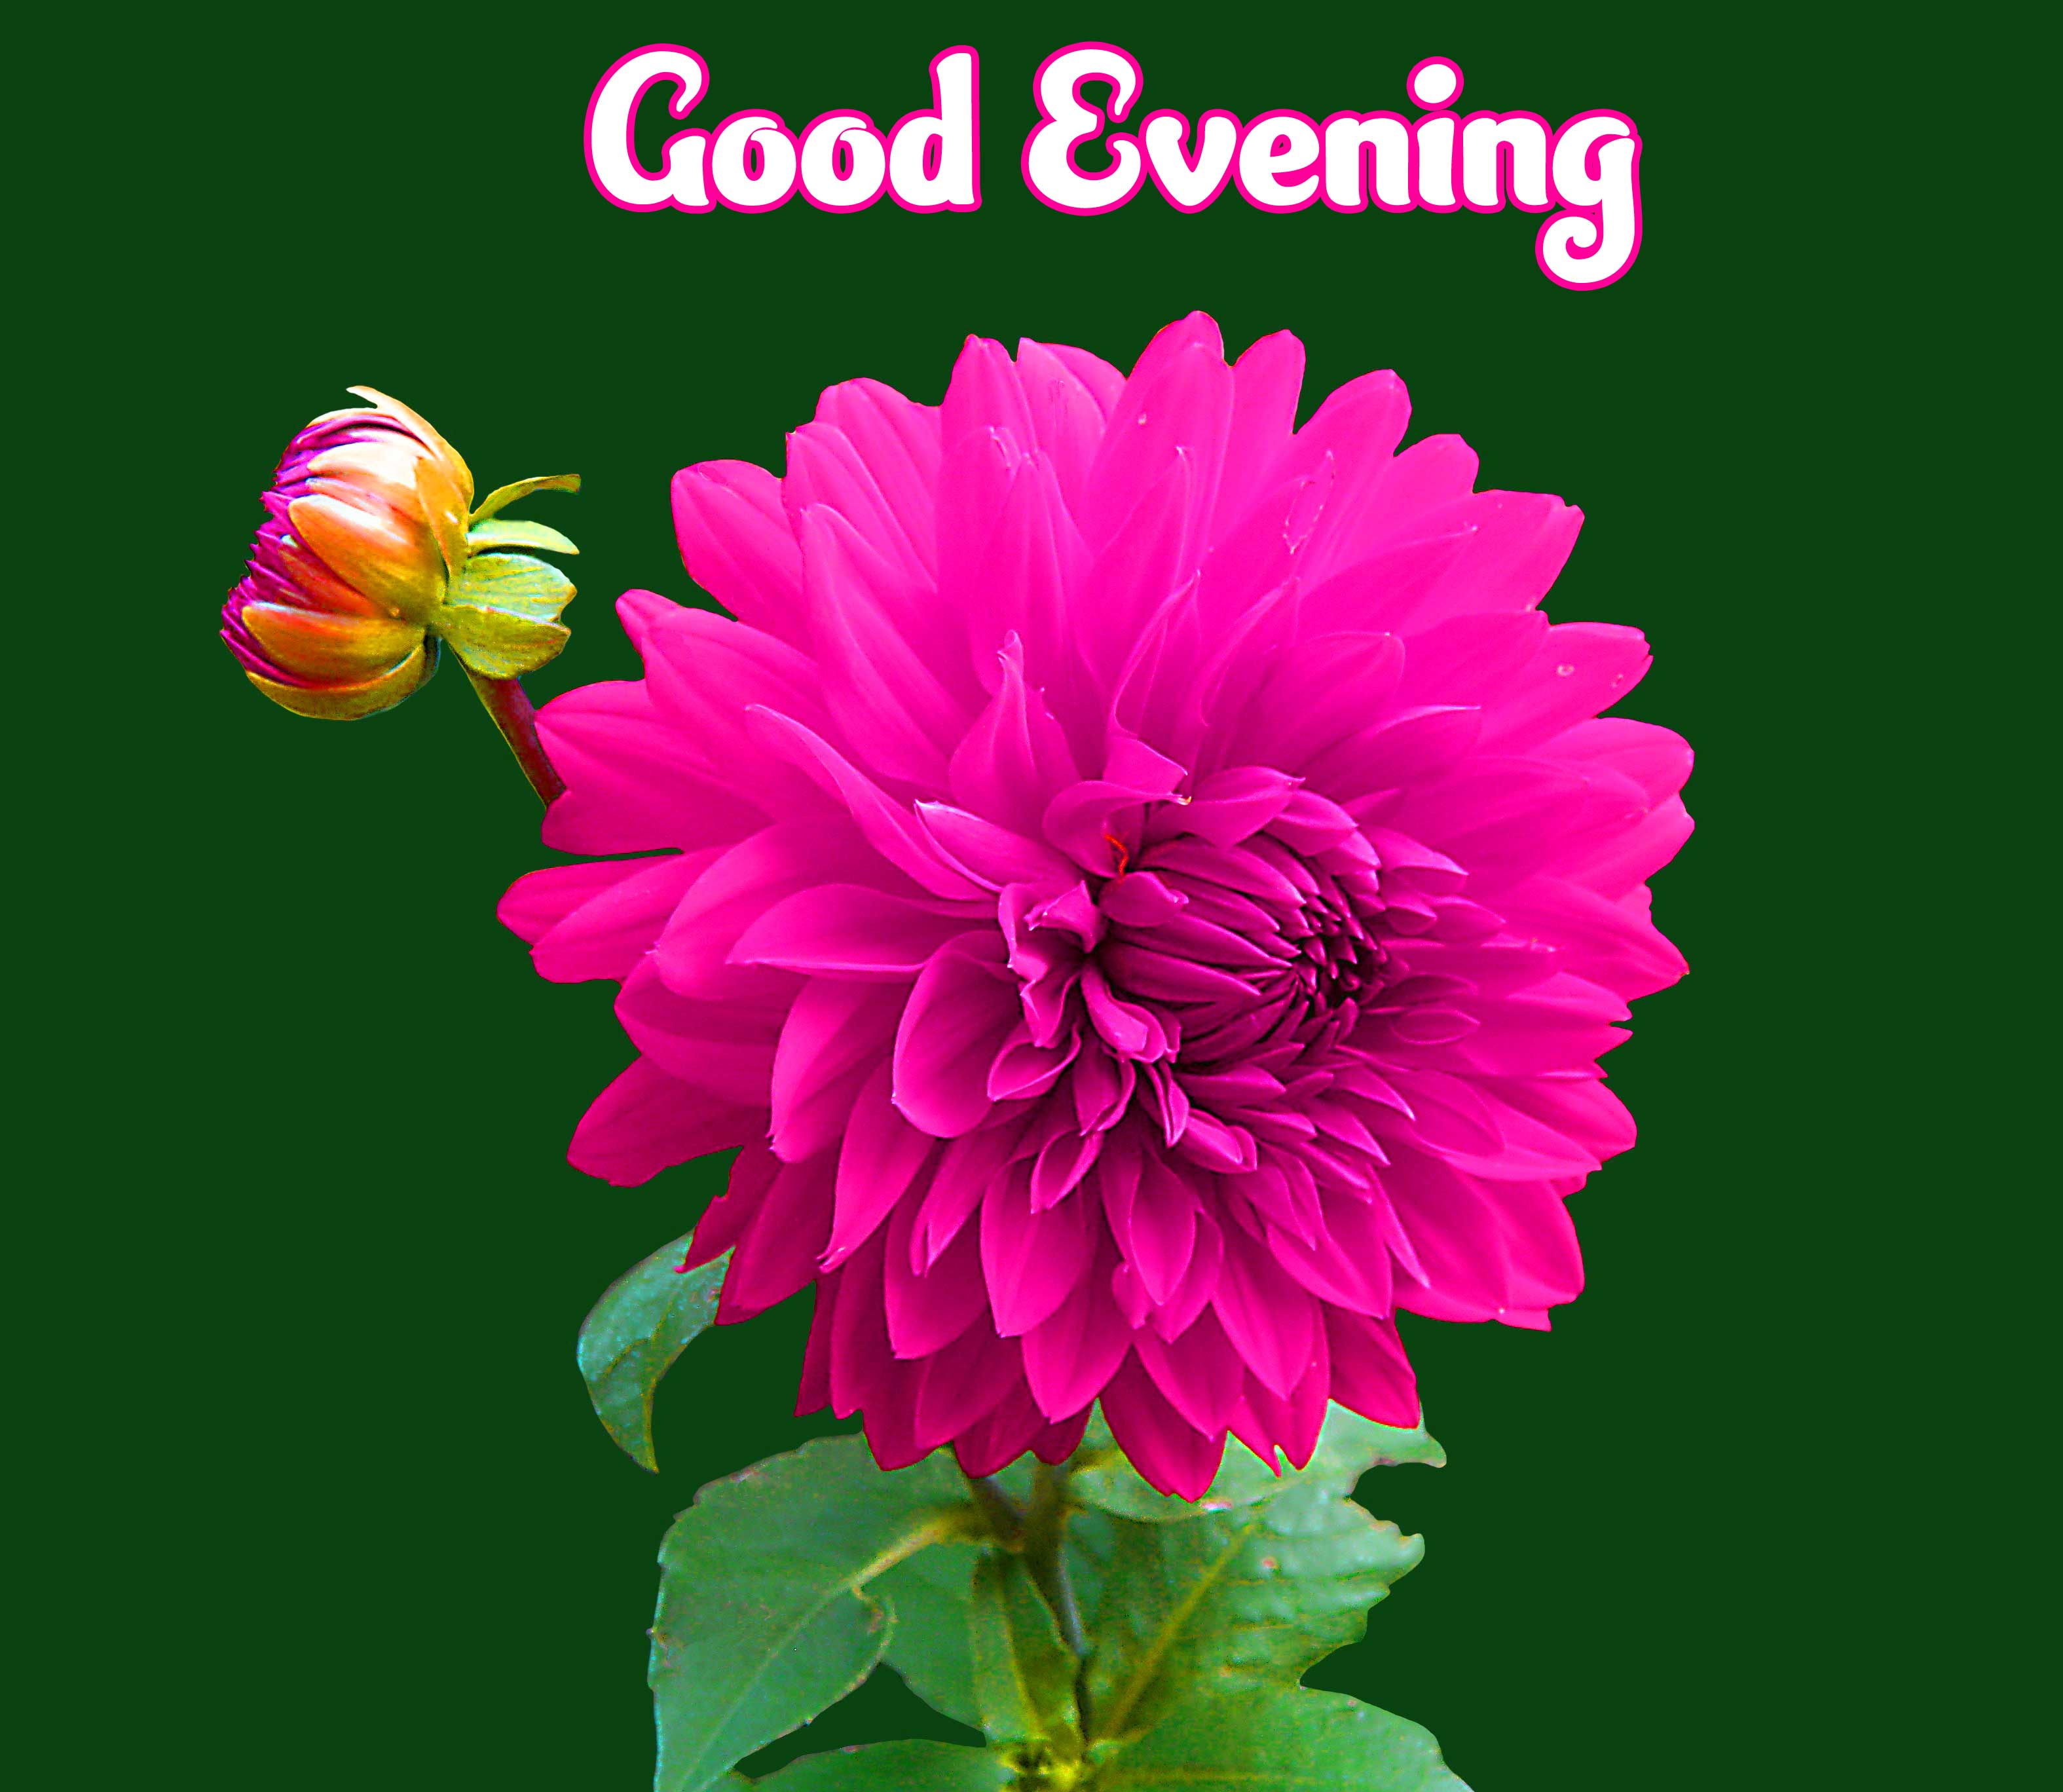 All Beautiful Good Evening Wishes Images pics Download 